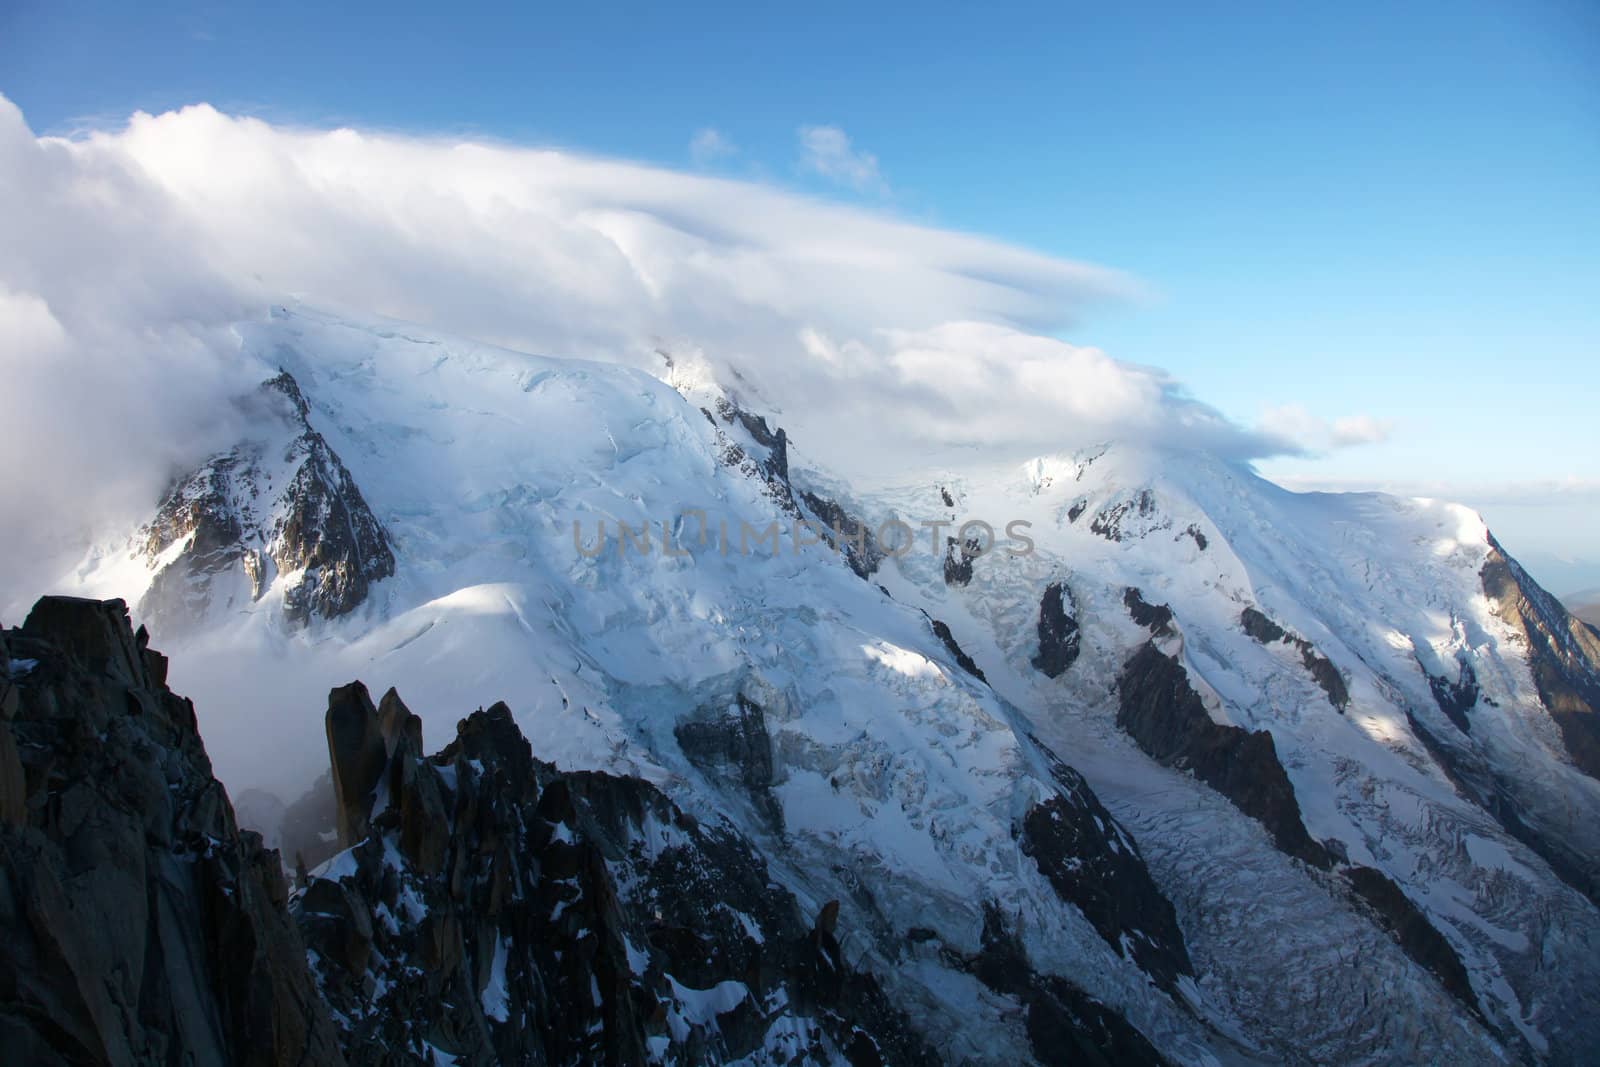 The mont blanc from Aiguille du Midi, the peak within the clouds.